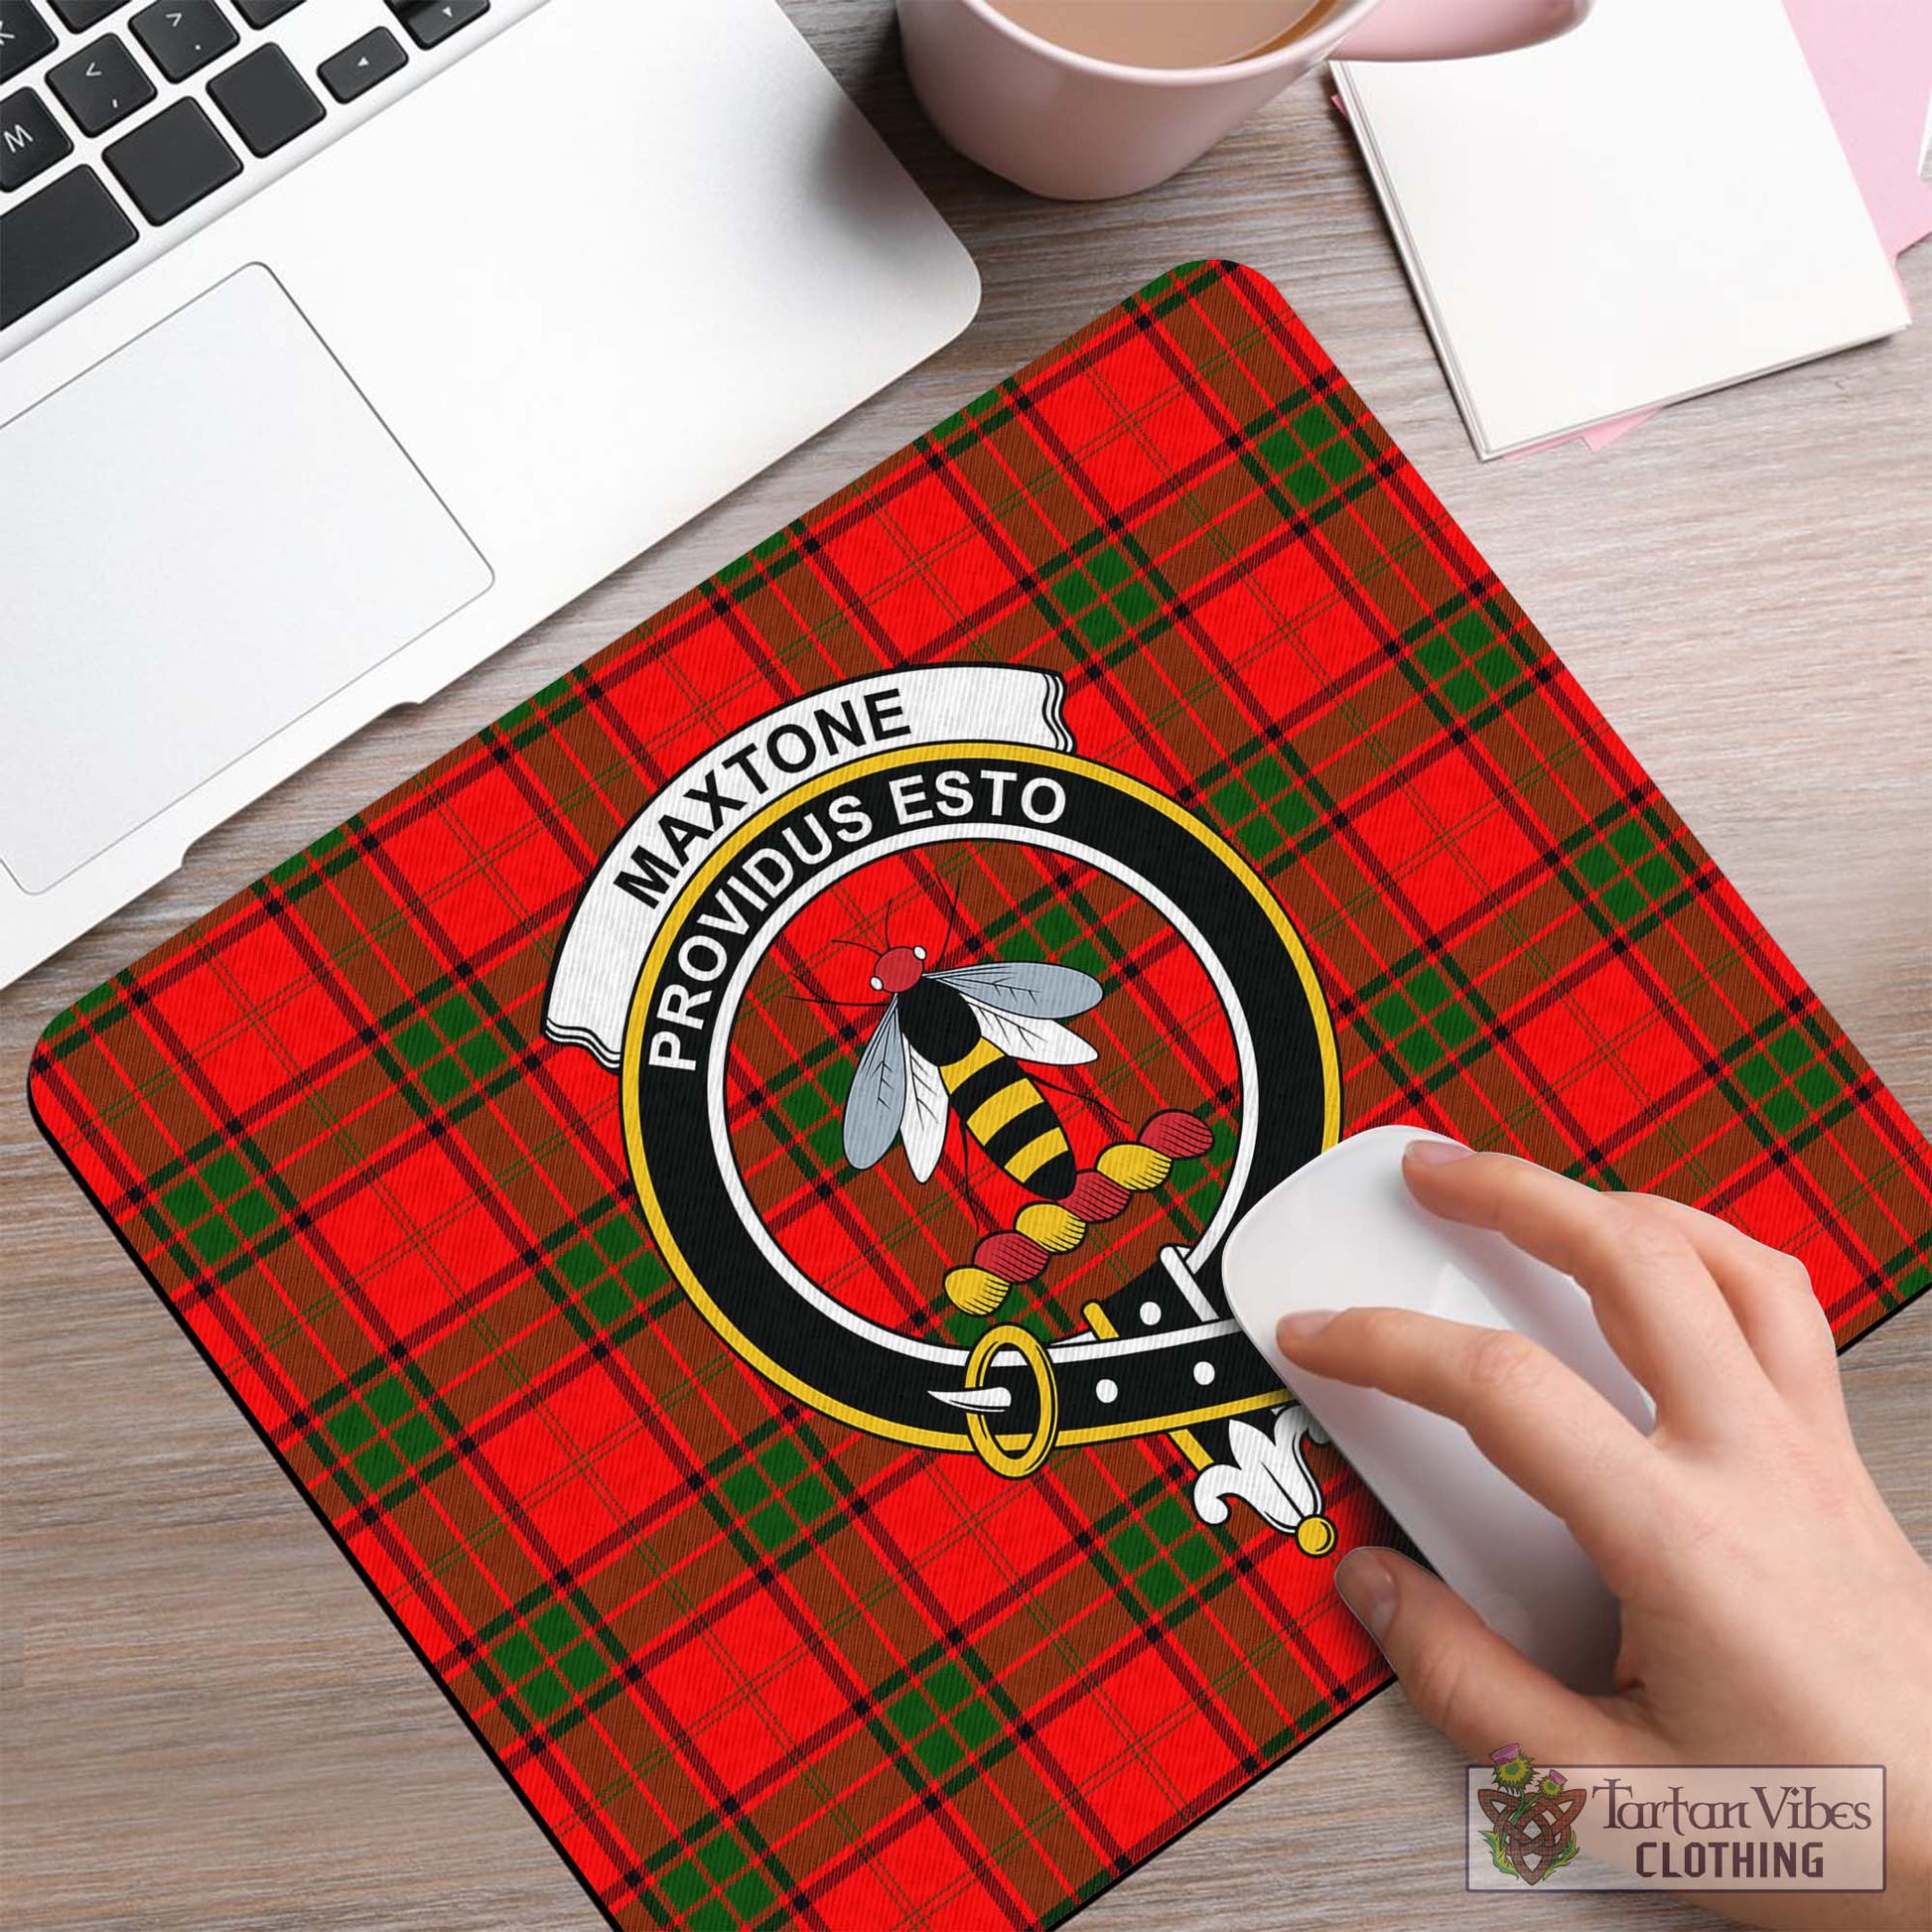 Tartan Vibes Clothing Maxtone Tartan Mouse Pad with Family Crest